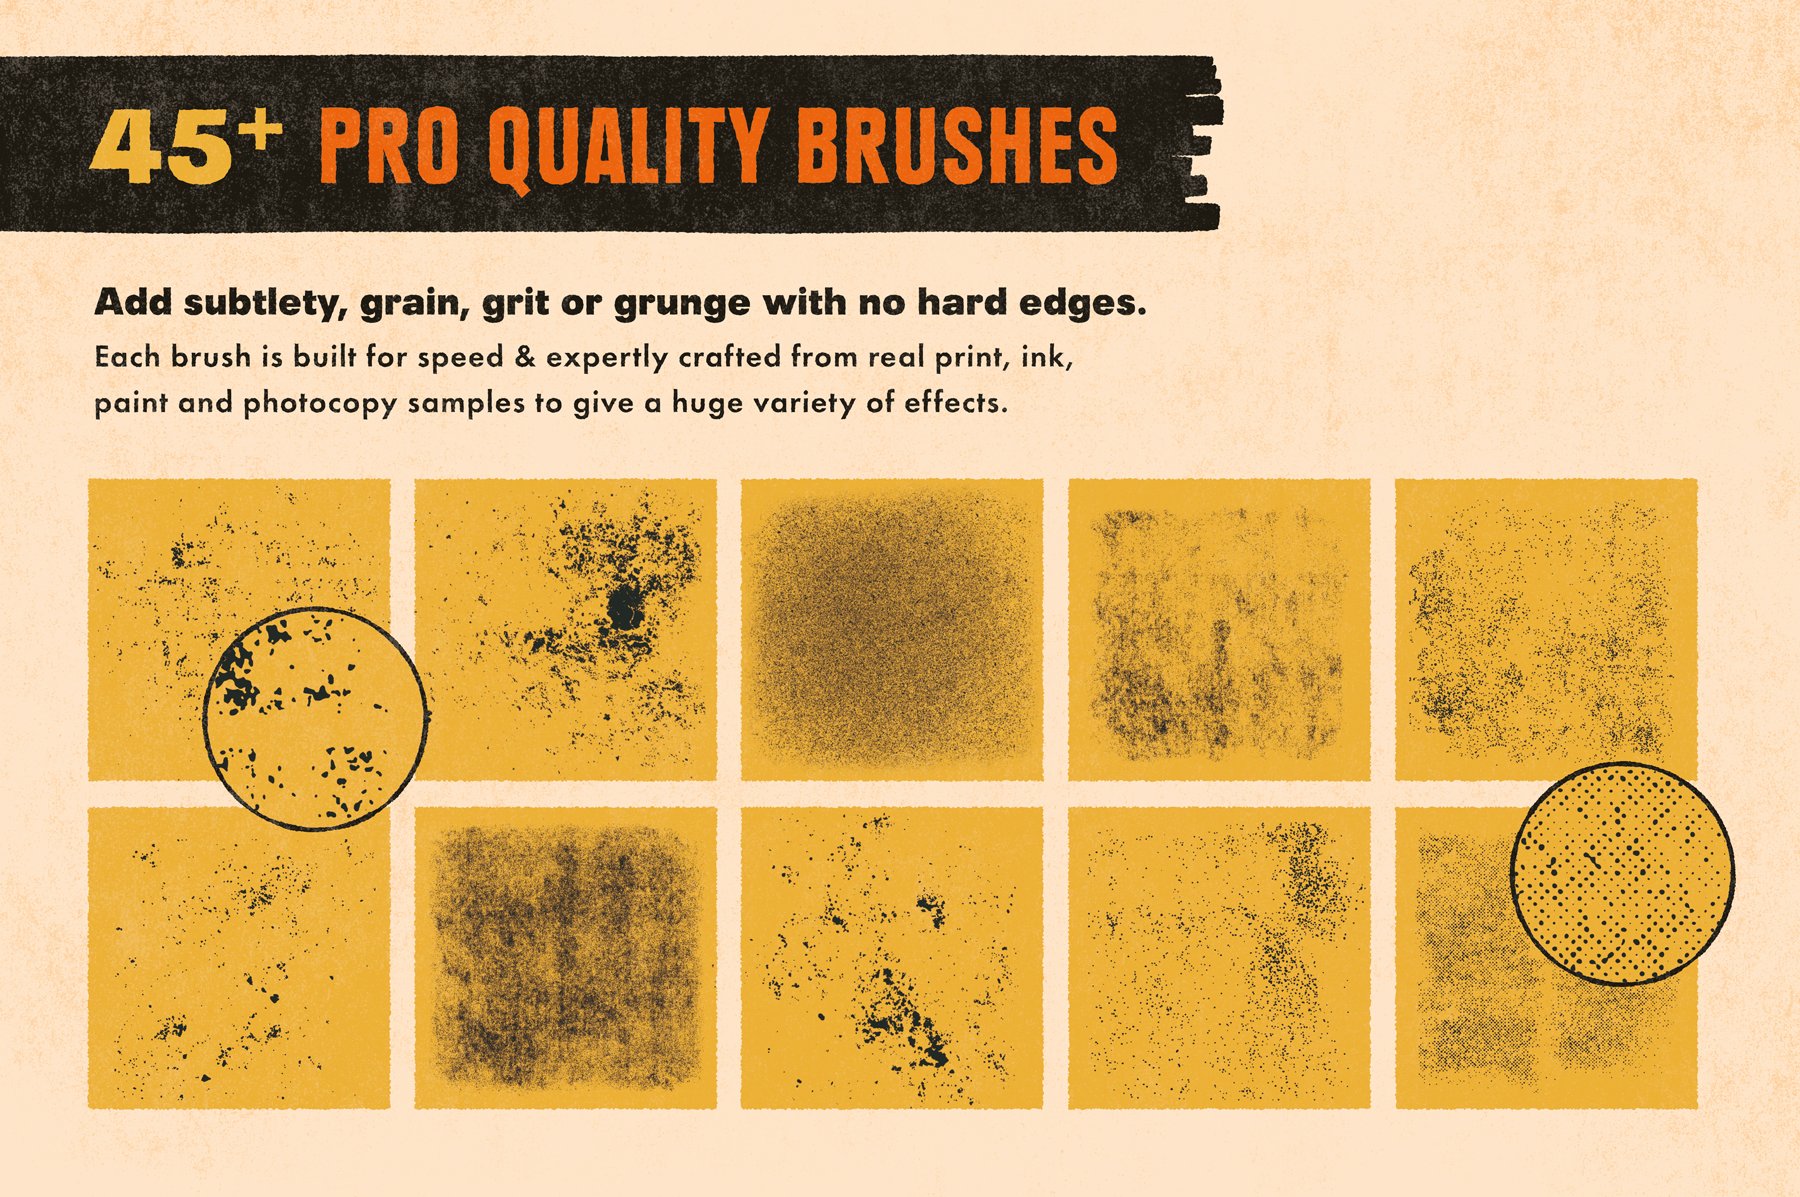 Fast Grit Brushes For Photoshoppreview image.